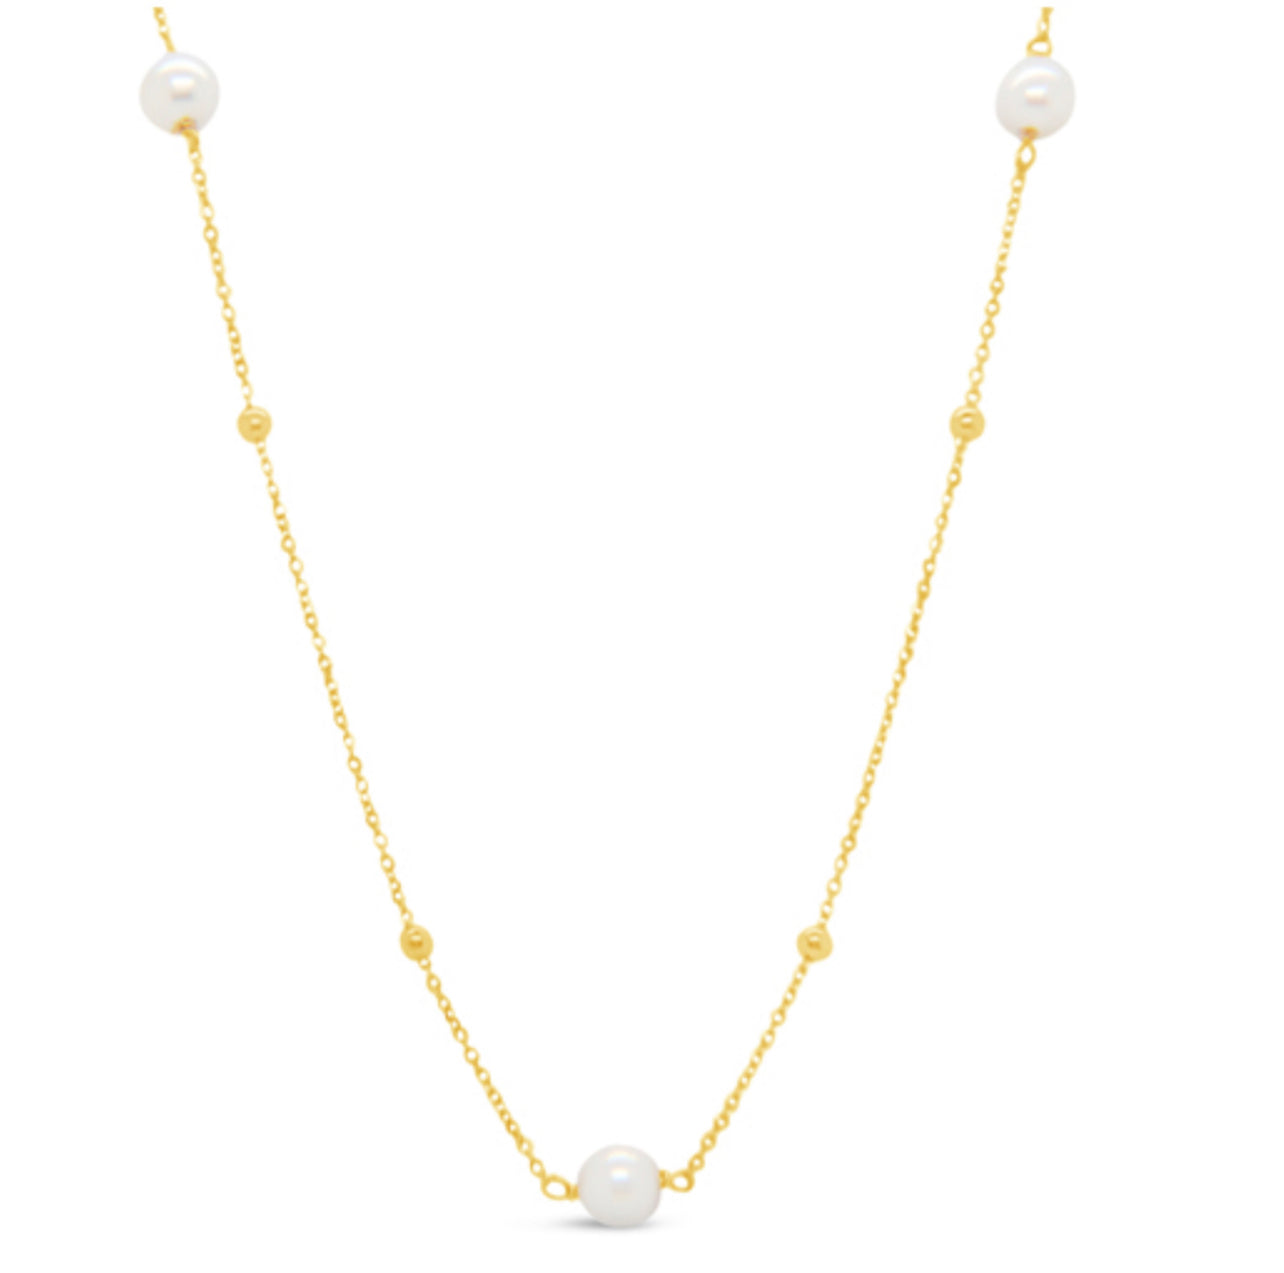 18K CULTIVATED PEARL NECKLACE